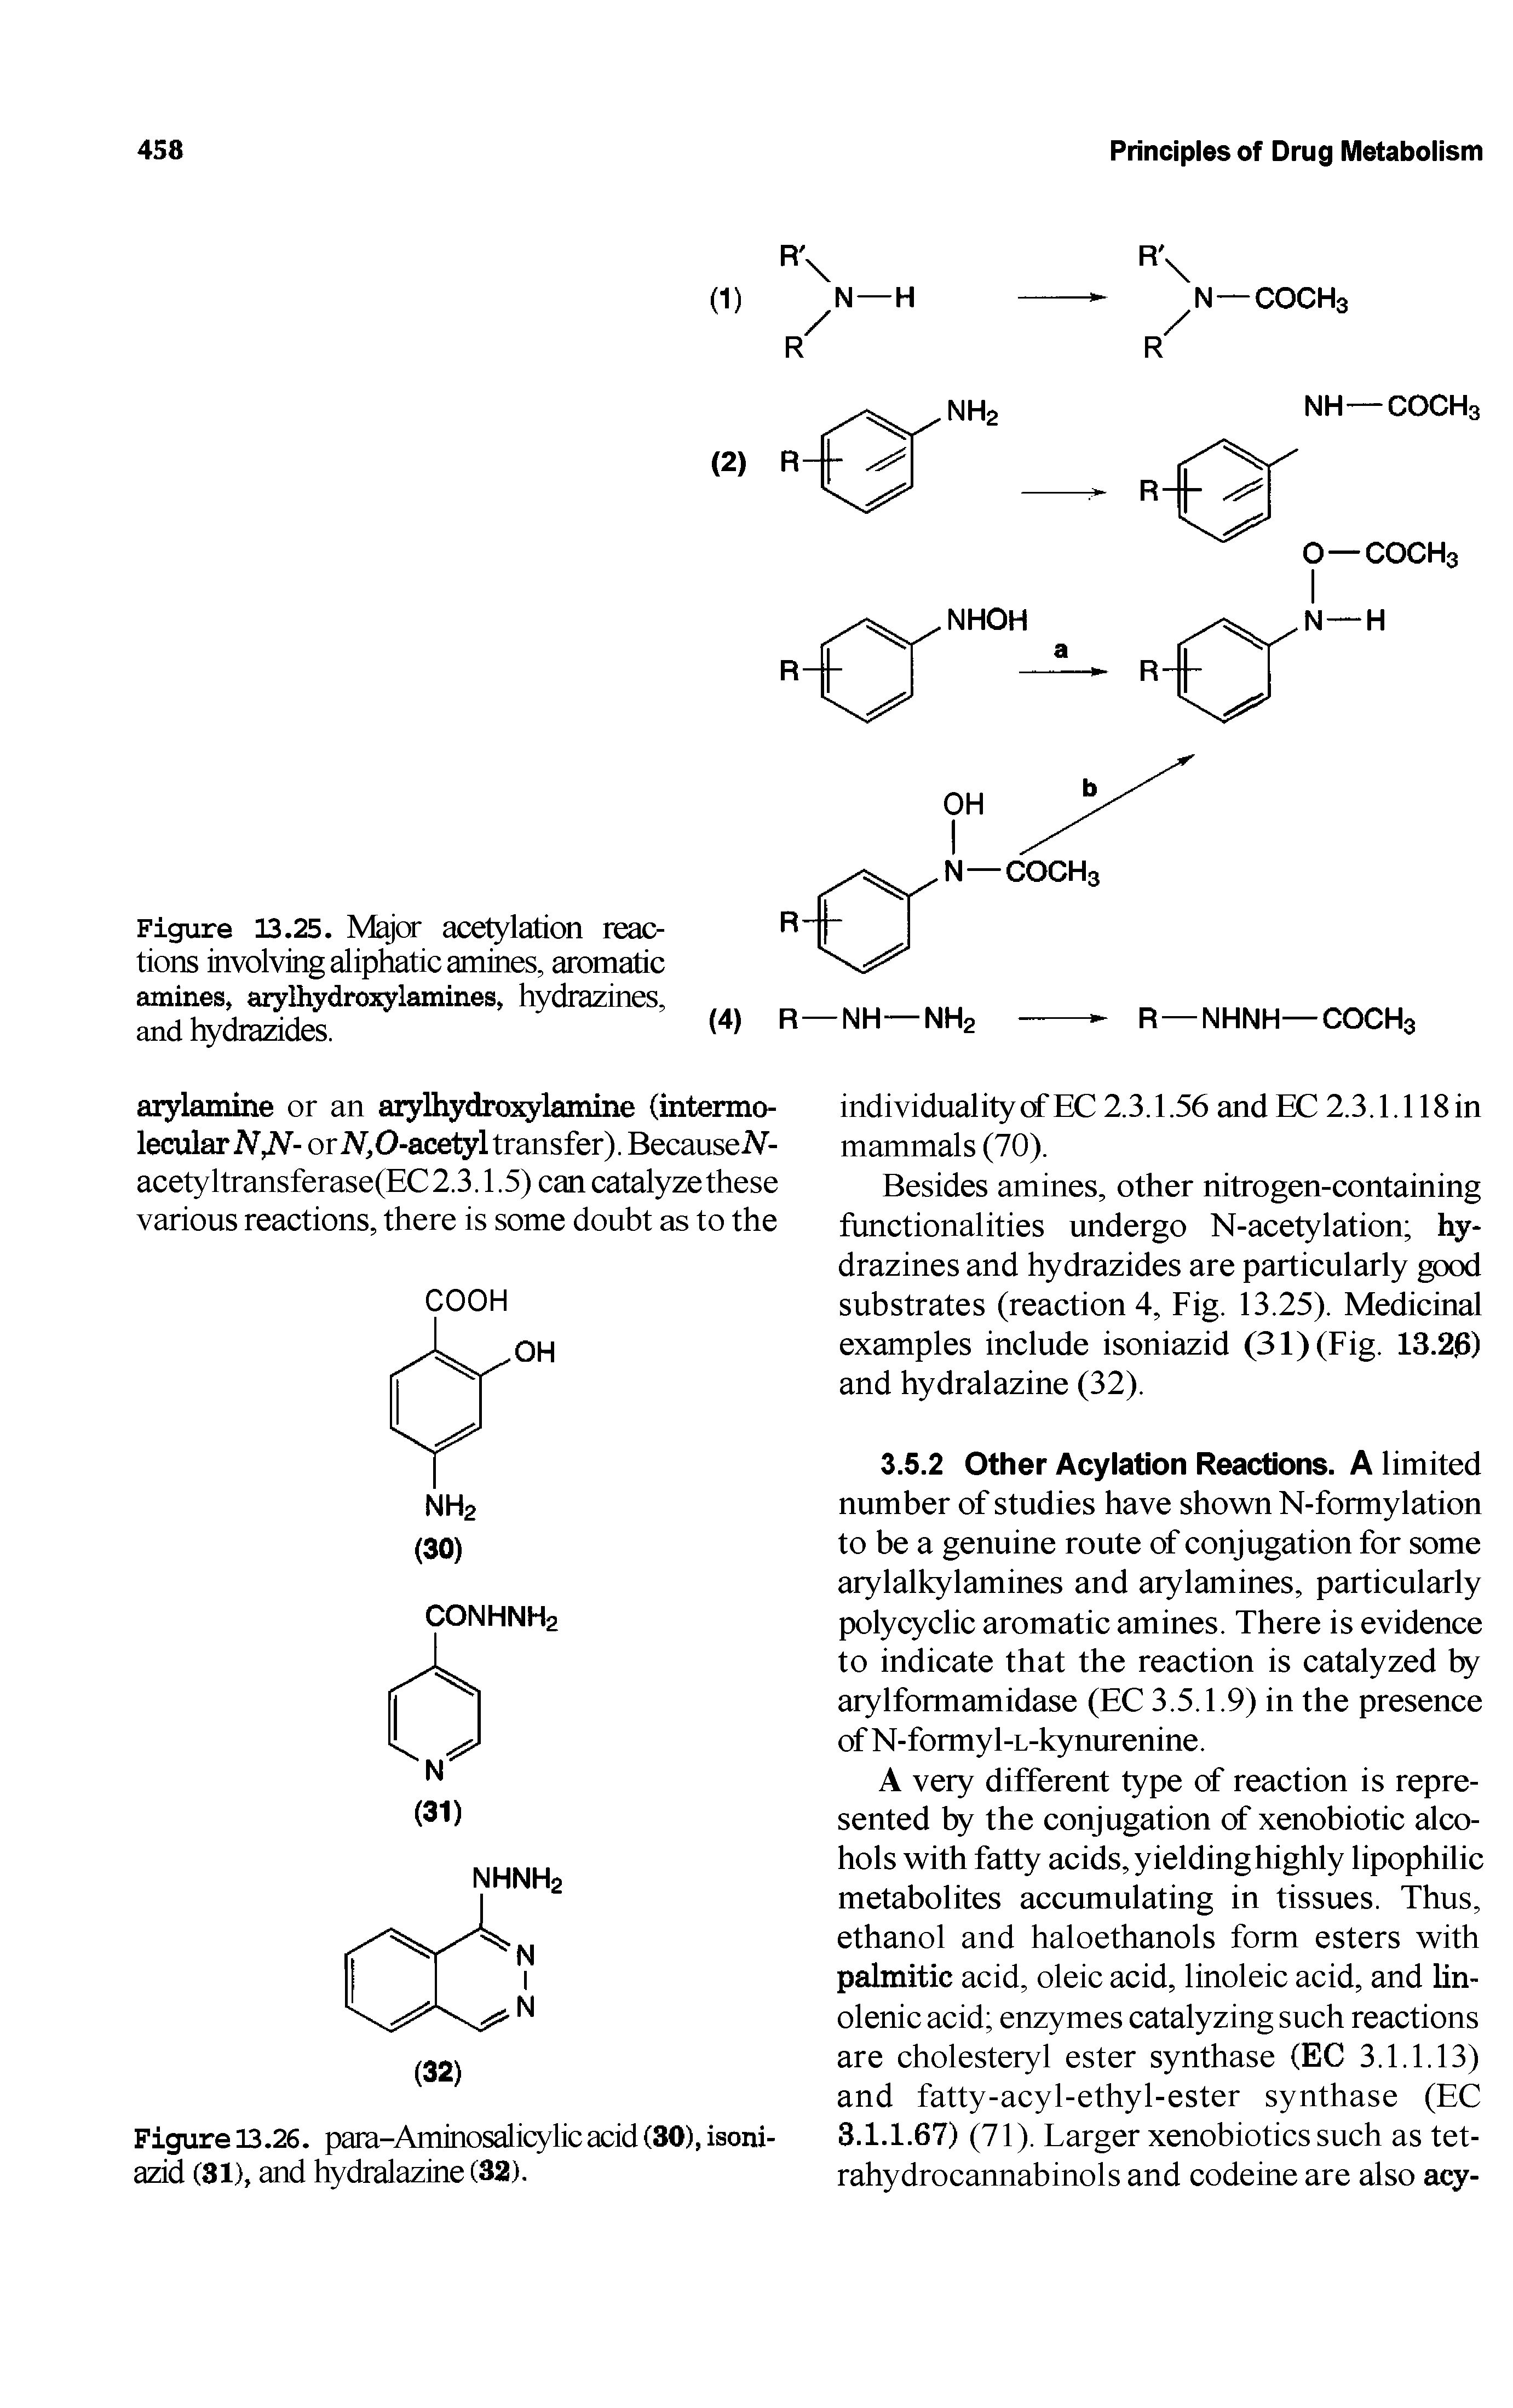 Figure 13.25. Major acetylation reactions involving aliphatic amines, aromatic amines, arylhydroxylamines, hydrazines, and hydrazides.